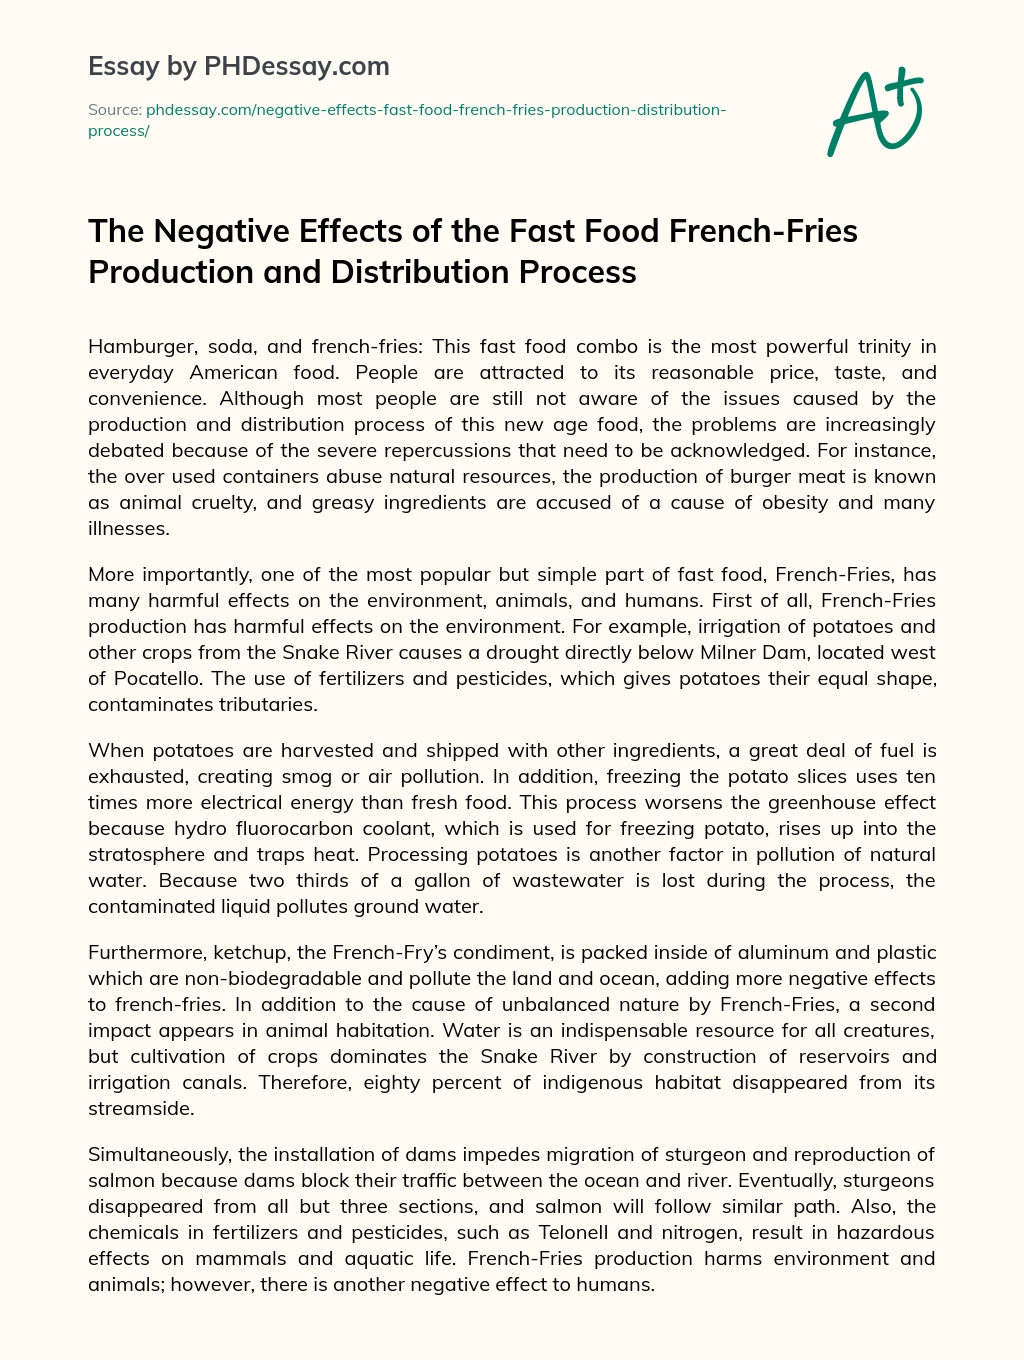 The Negative Effects of the Fast Food French-Fries Production and Distribution Process essay